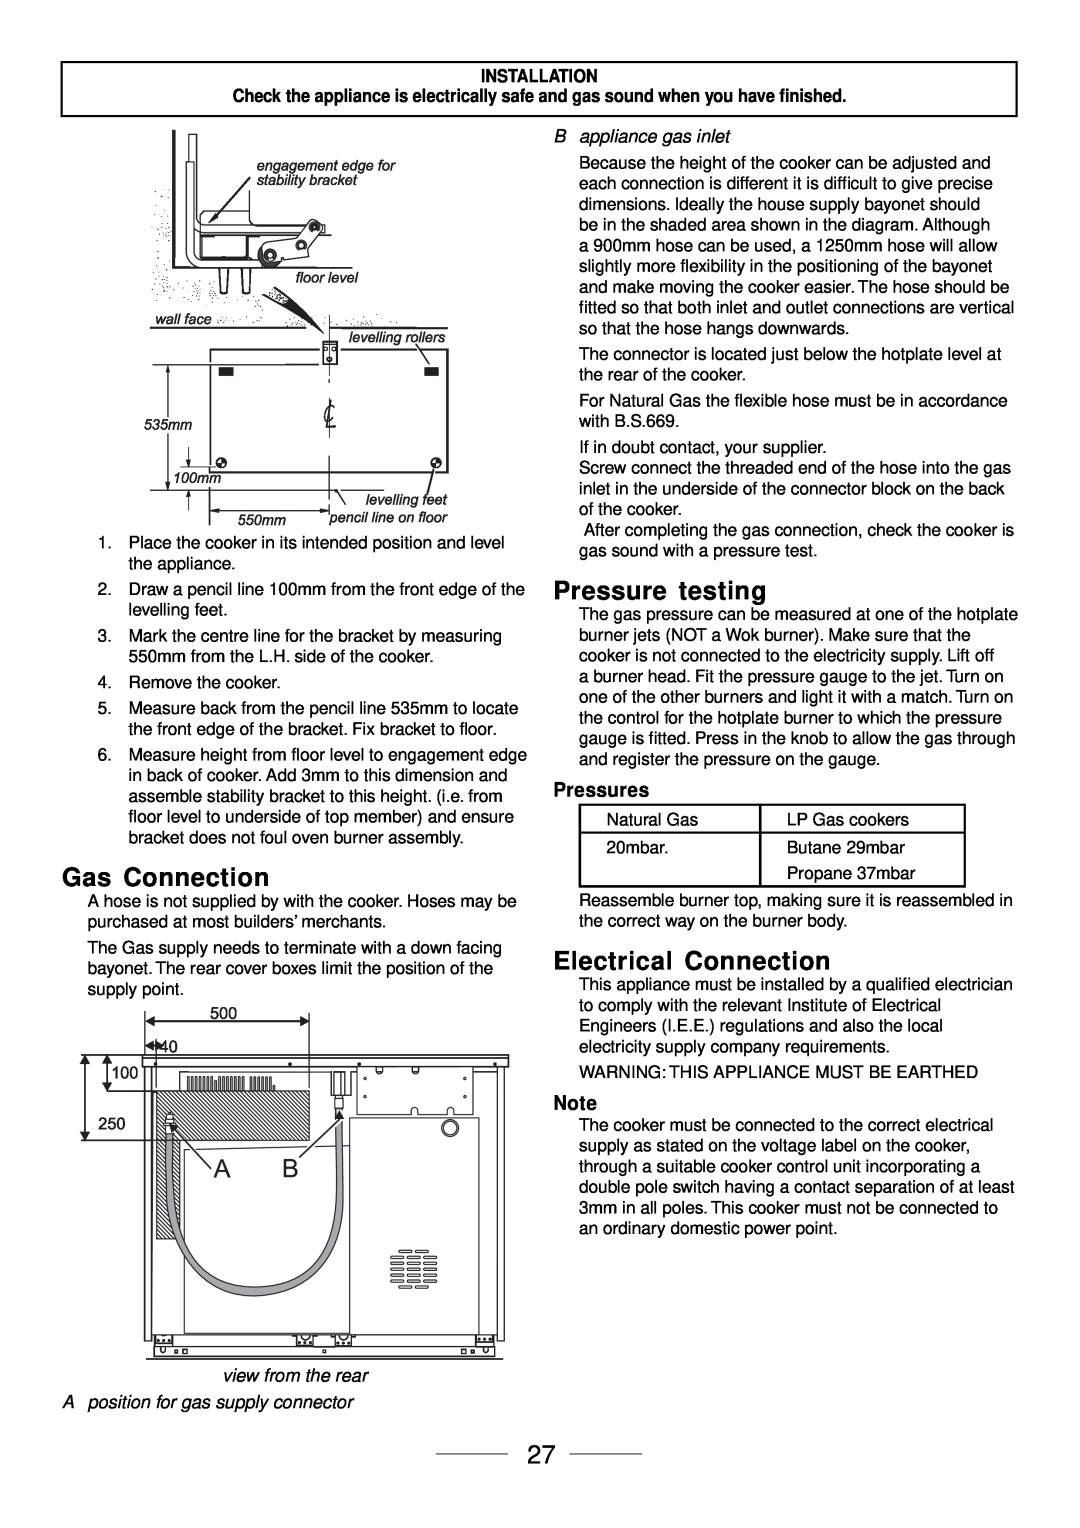 Maytag 110 installation instructions Gas Connection, Pressure testing, Electrical Connection, Pressures, Installation 